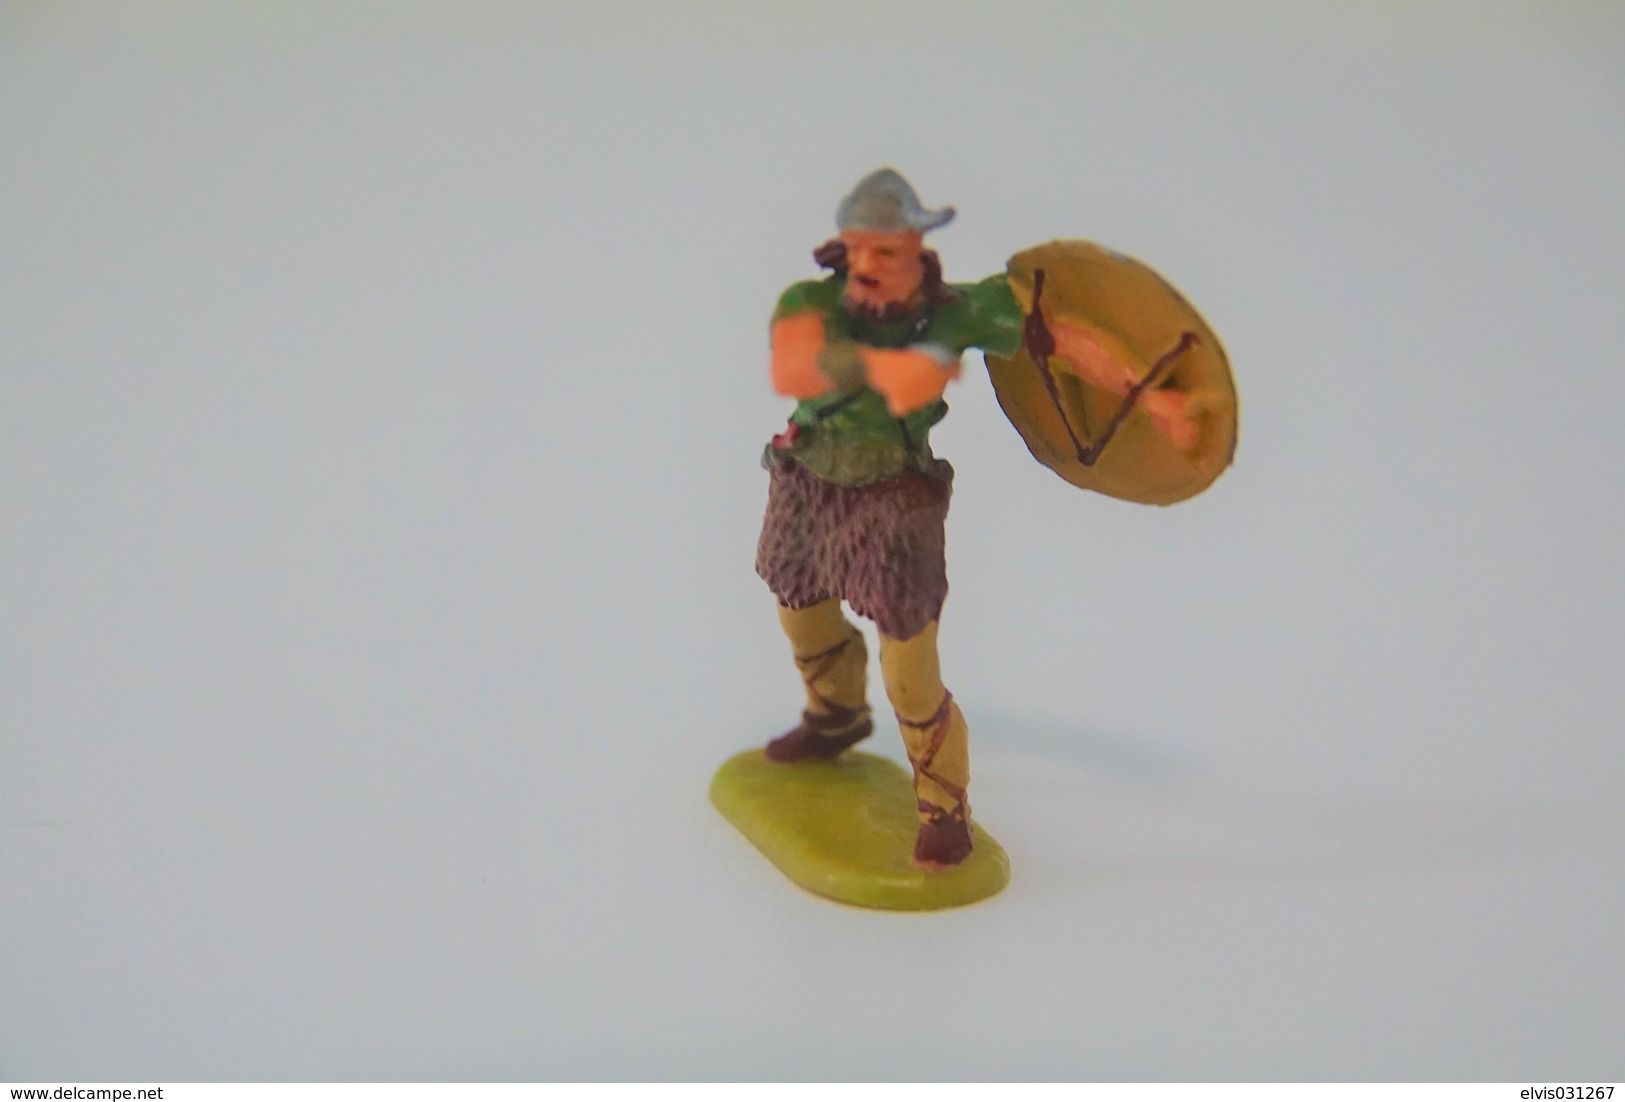 Elastolin, Lineol Hauser, H=40mm, Norman, Plastic - Vintage Toy Soldier FOR PARTS OR REPAIR - Figurines